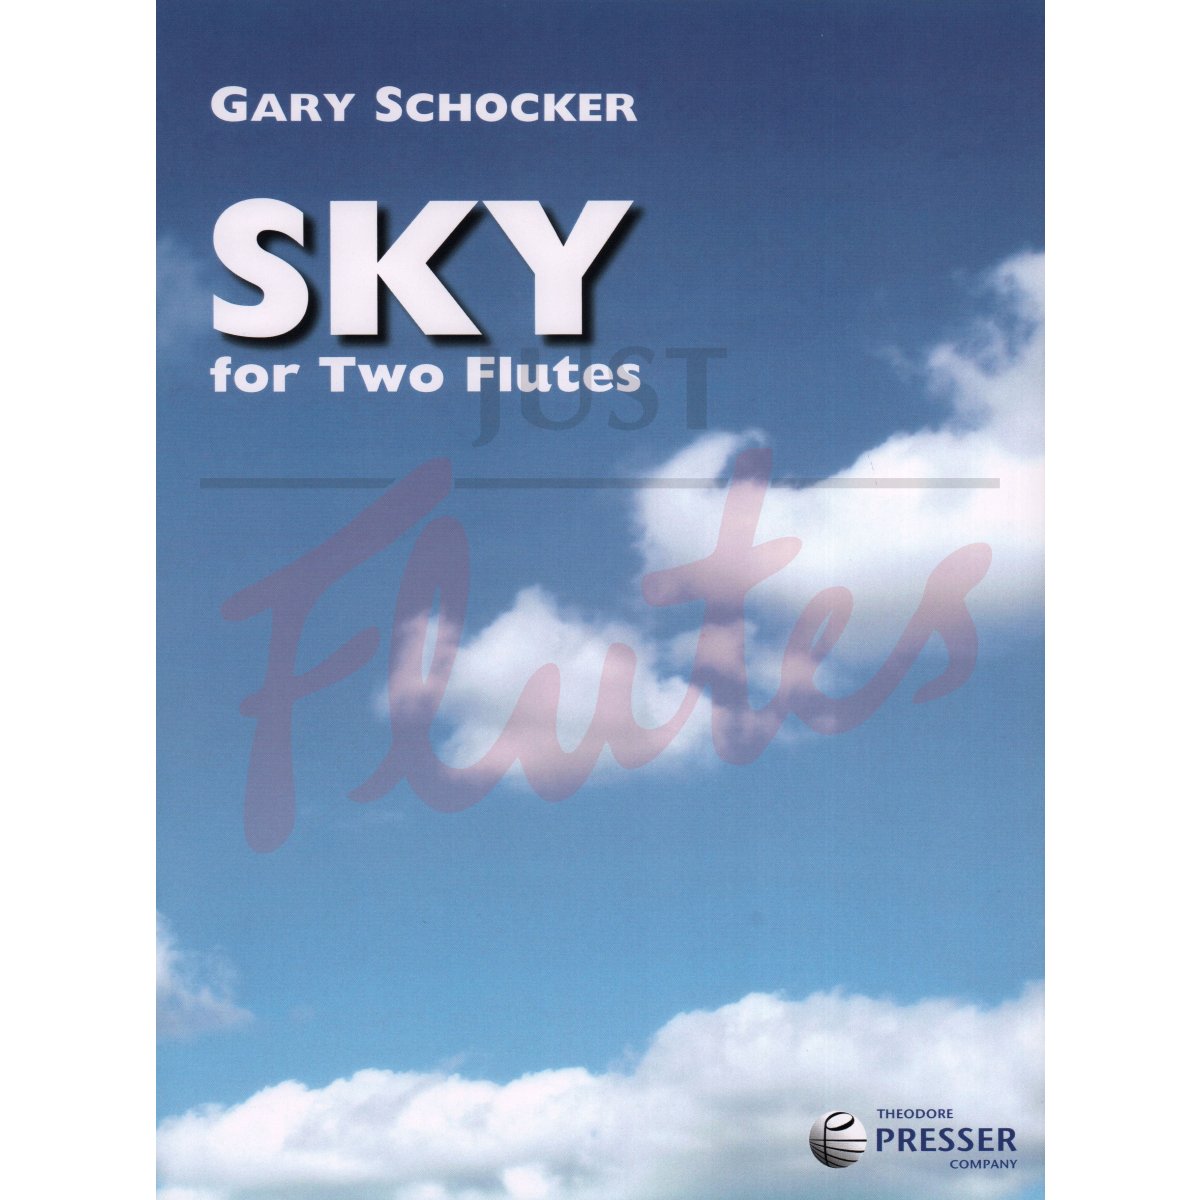 Sky for Two Flutes